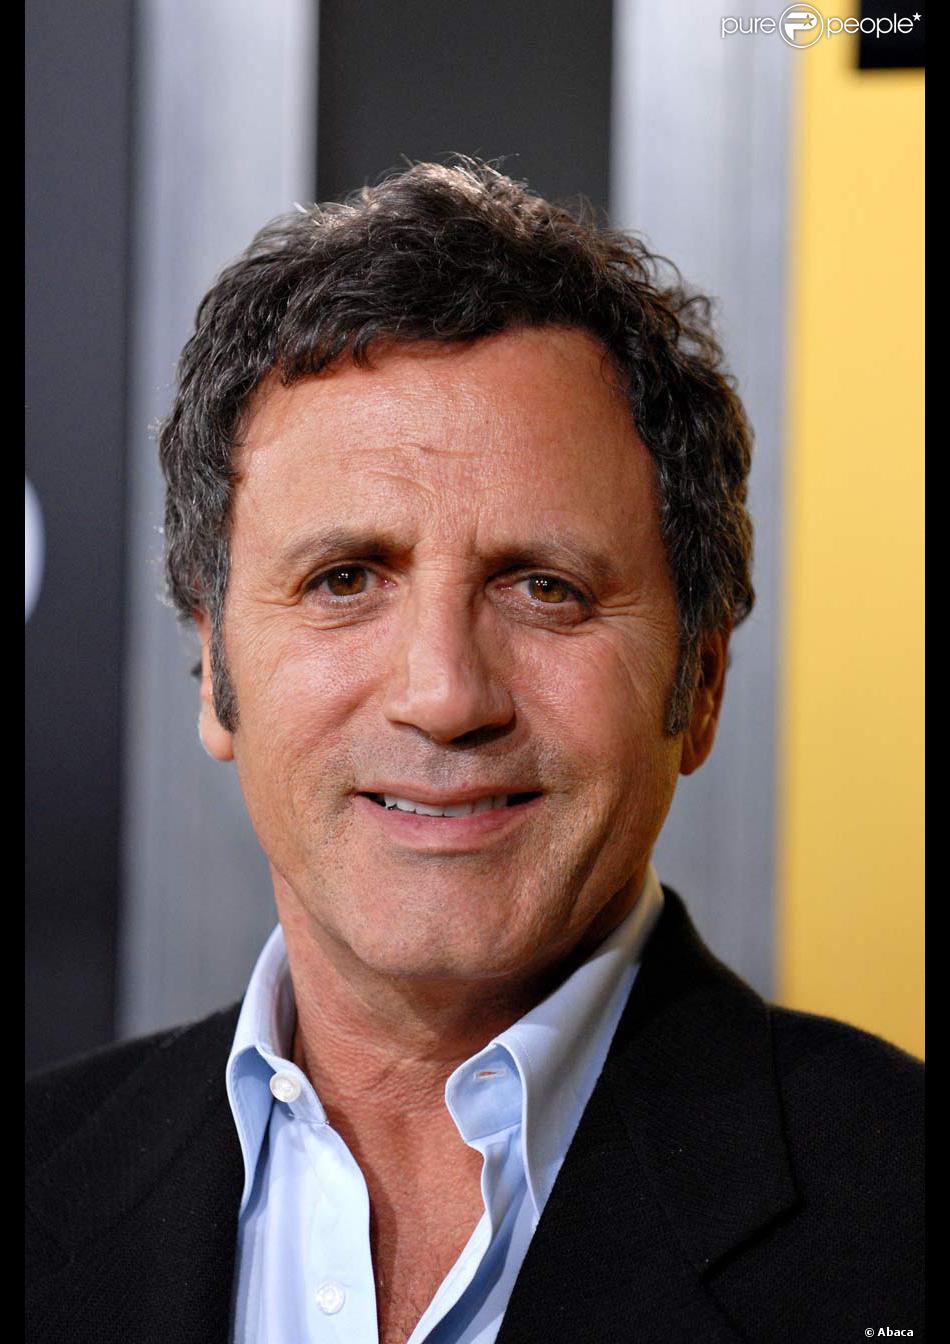 Static1 Purepeople Com Articles 9 21 07 9 1504 Frank Stallone 950x0 1 Jpg